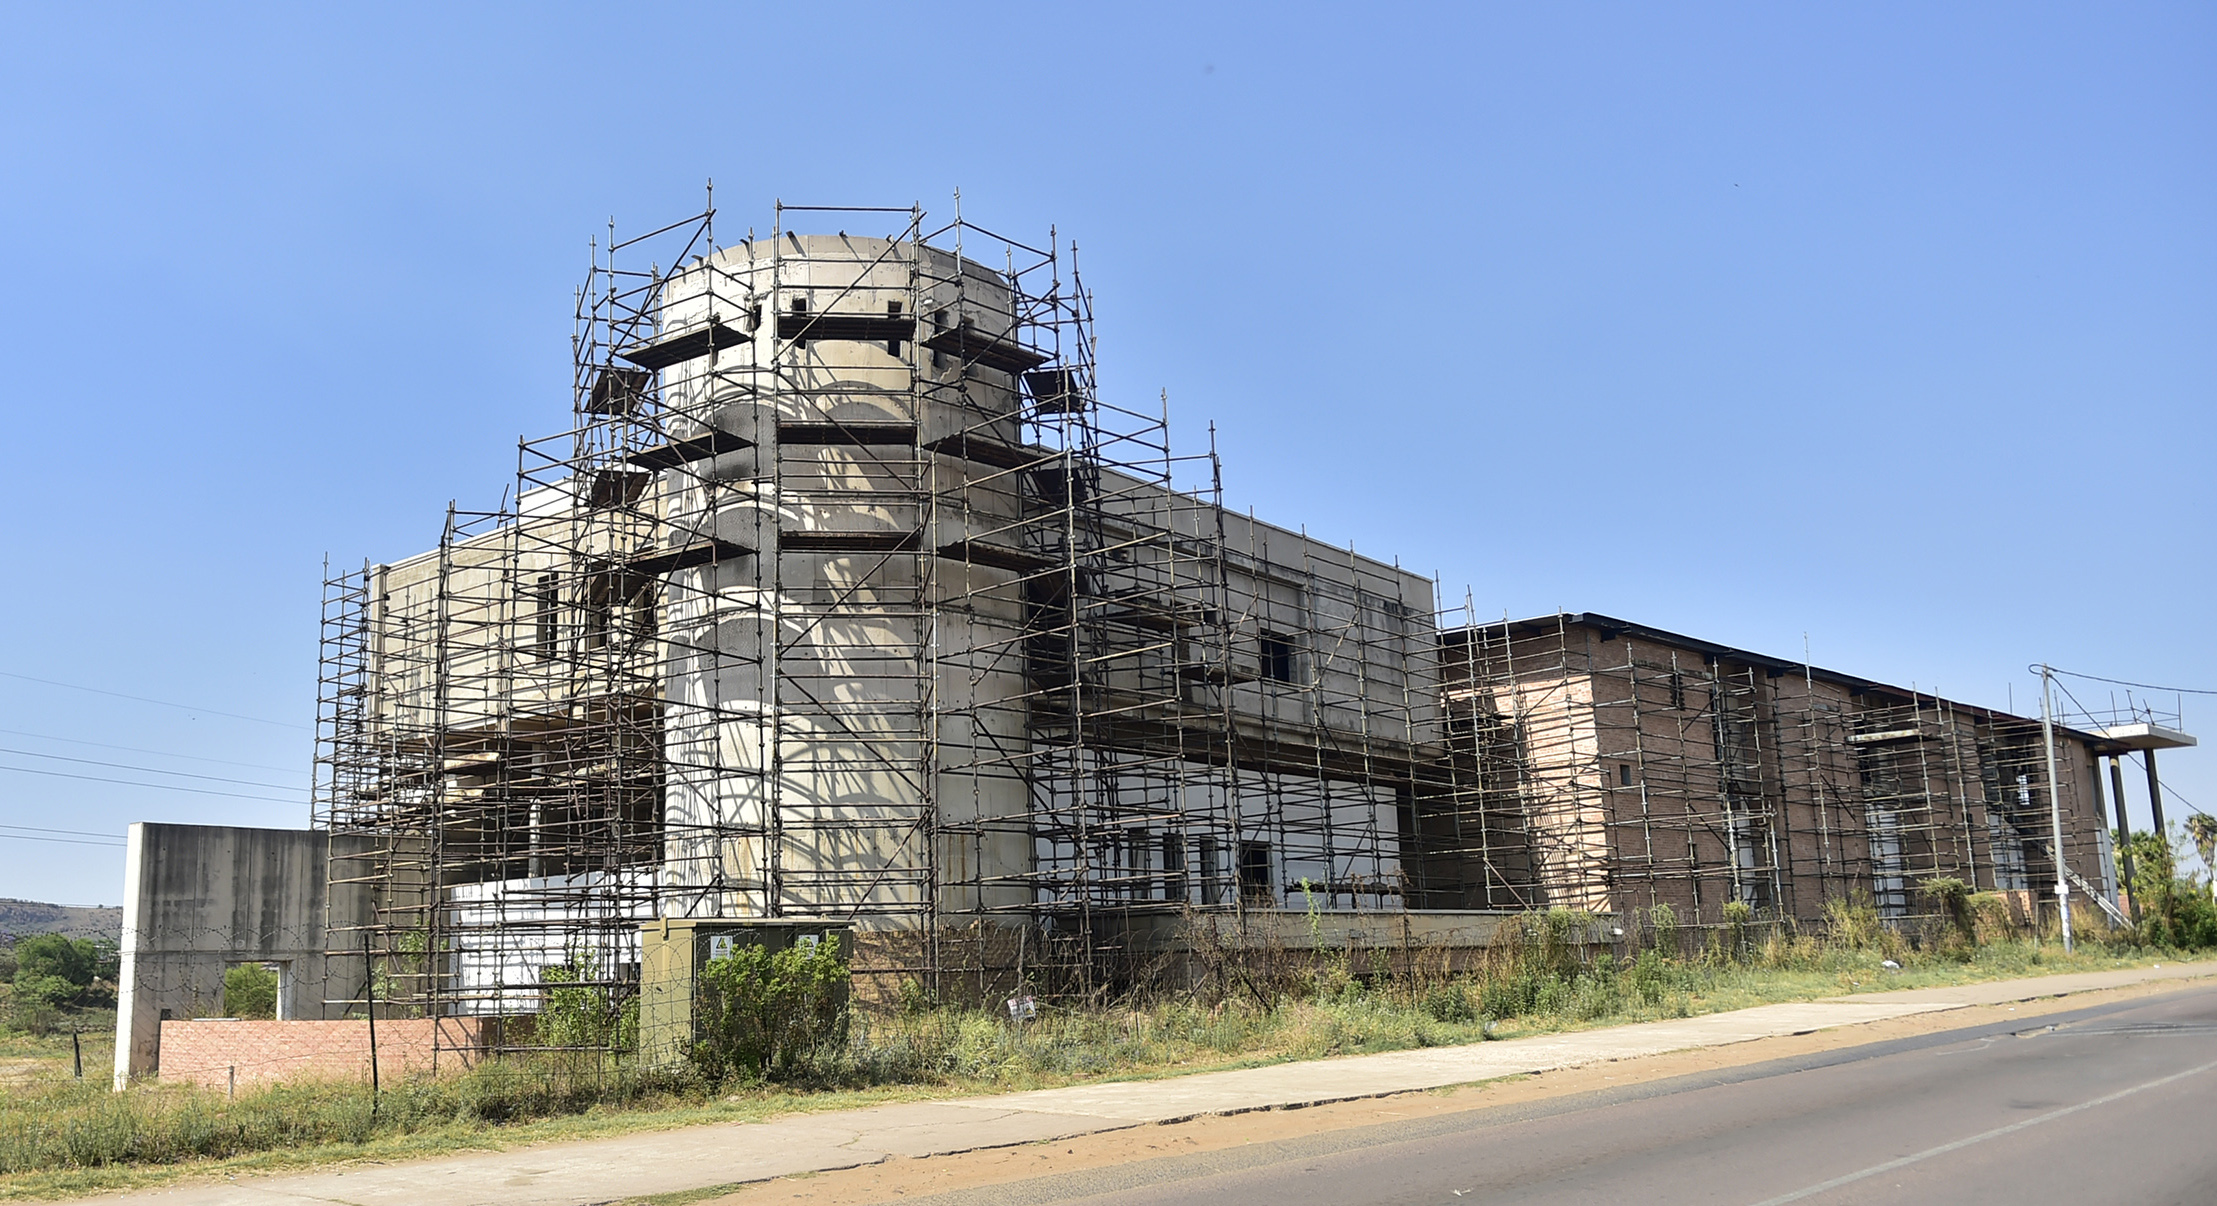 The incomplete Mamelodi Magistrates' Court building.